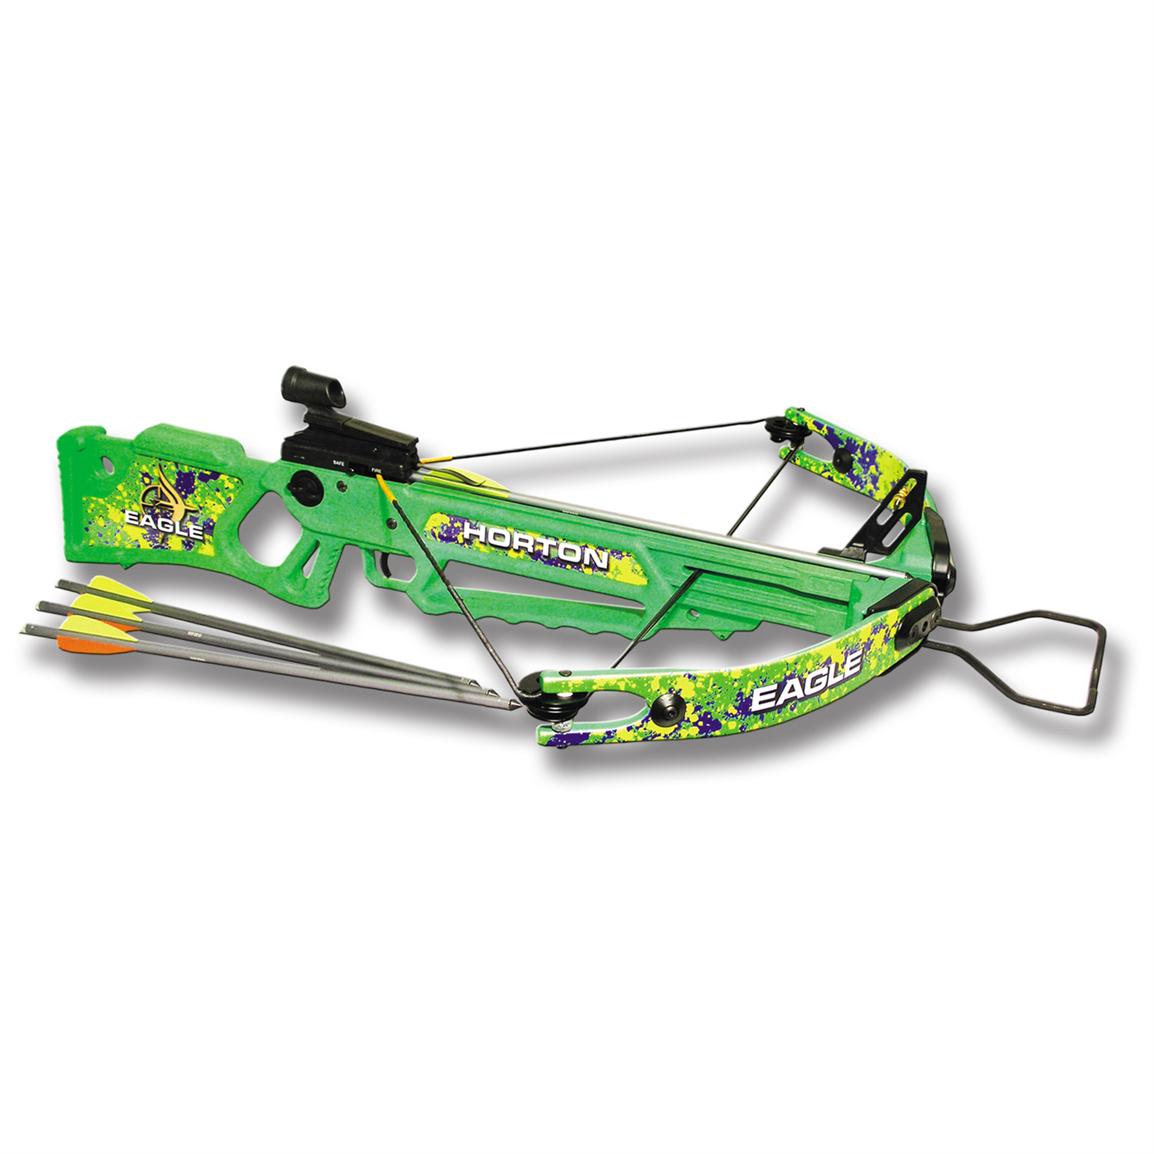 Horton Realtree Express 95 Professional Series Crossbow for sale online 